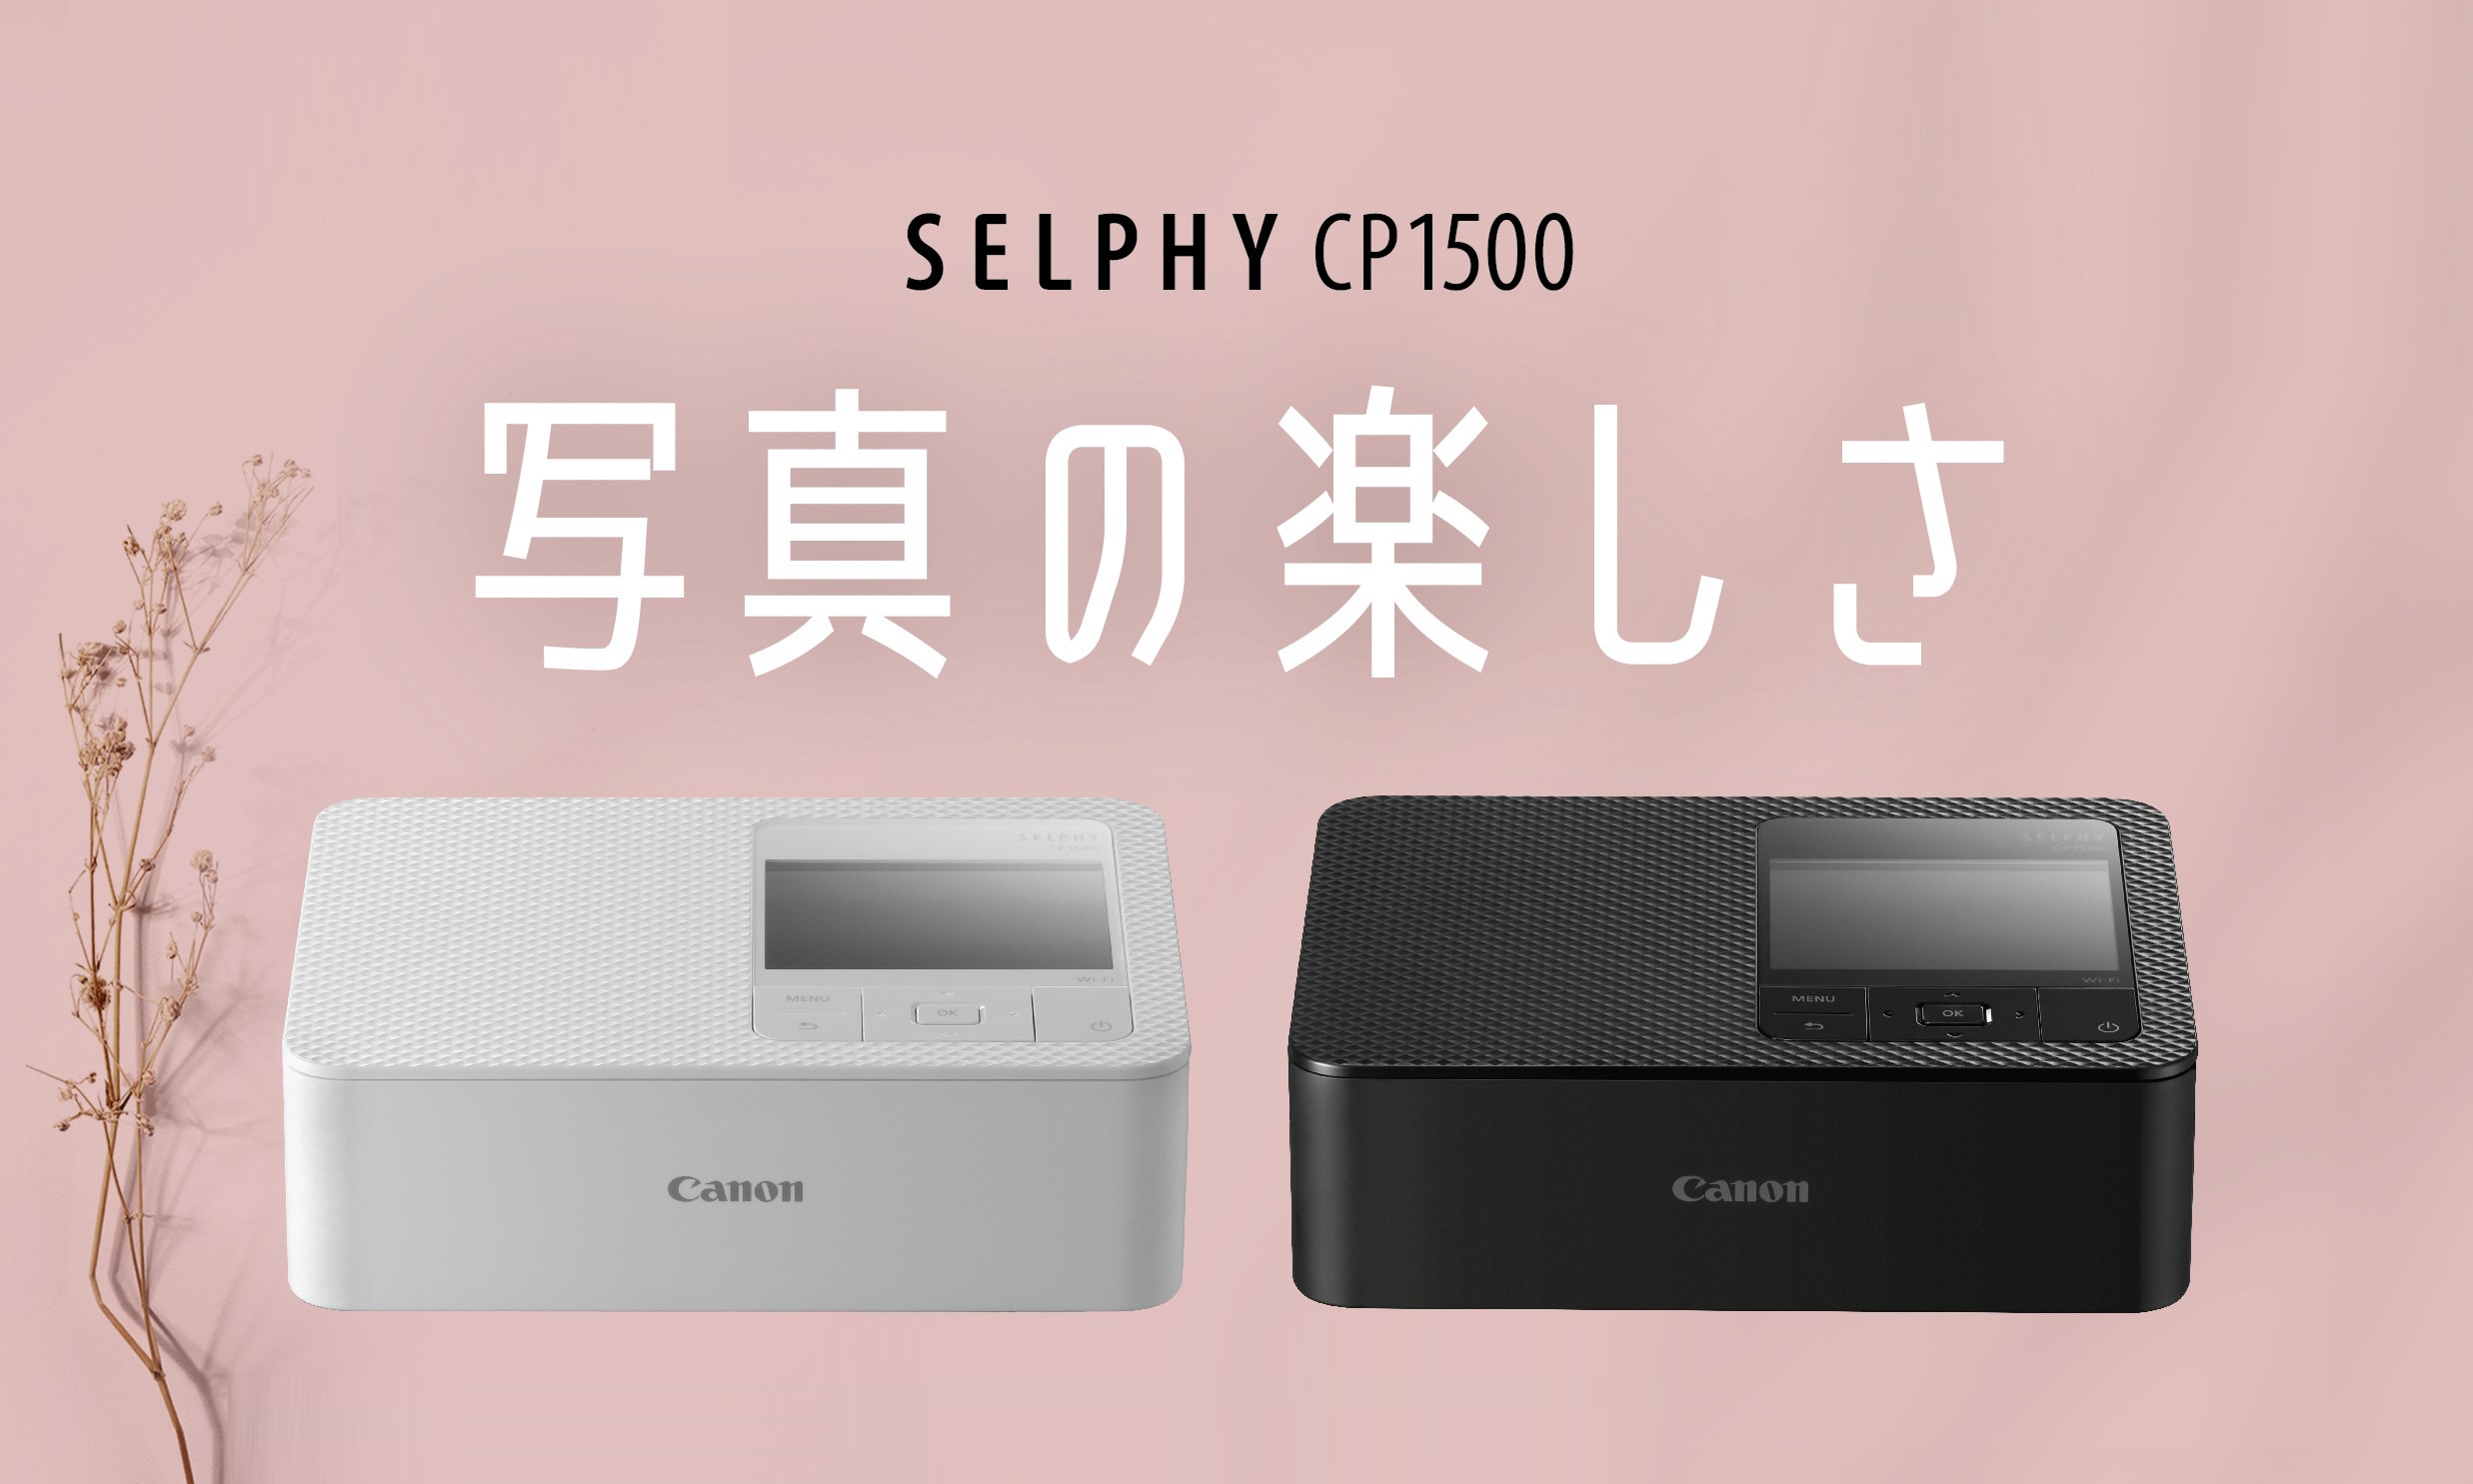 Canon Officially Launches the New SELPHY CP1500 Compact Photo Printer